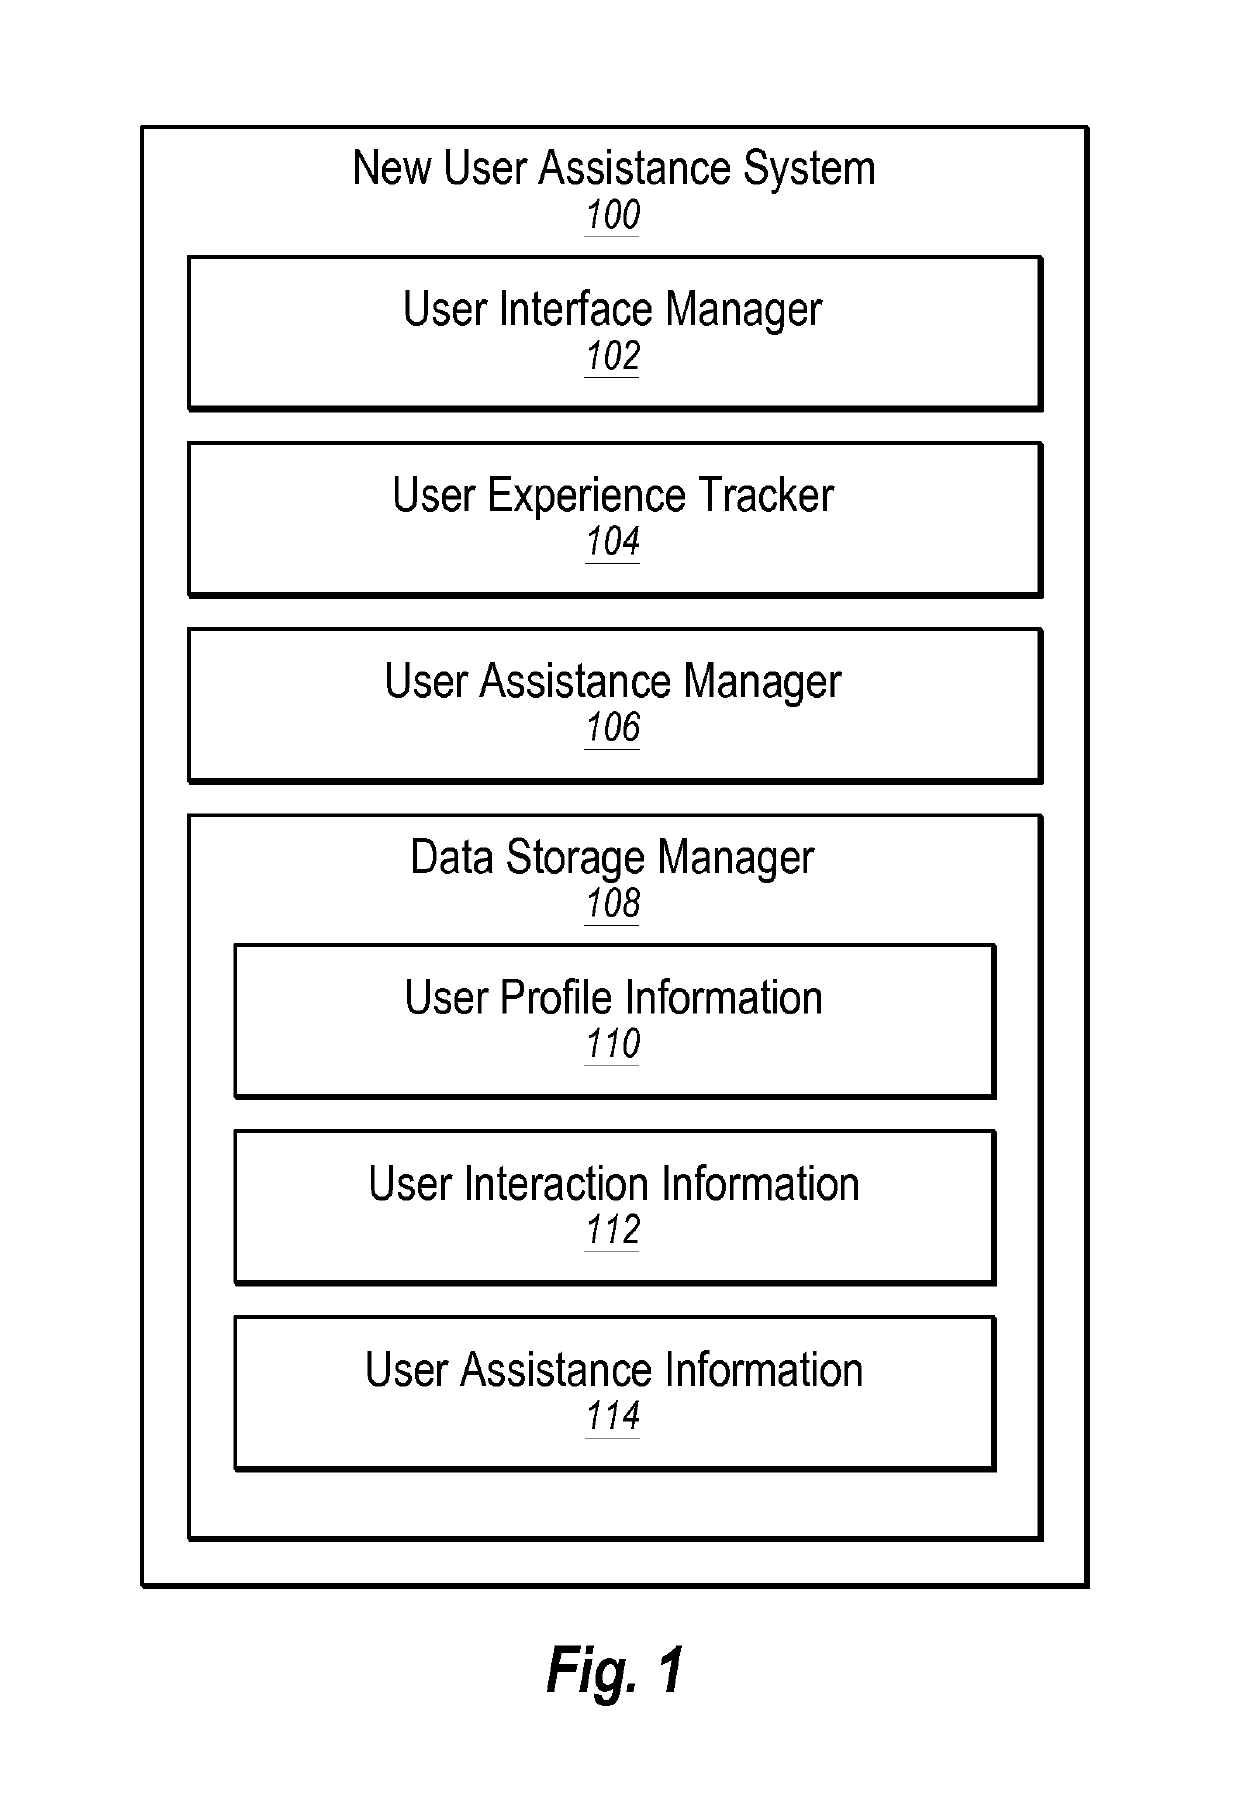 Assisting a user of a software application